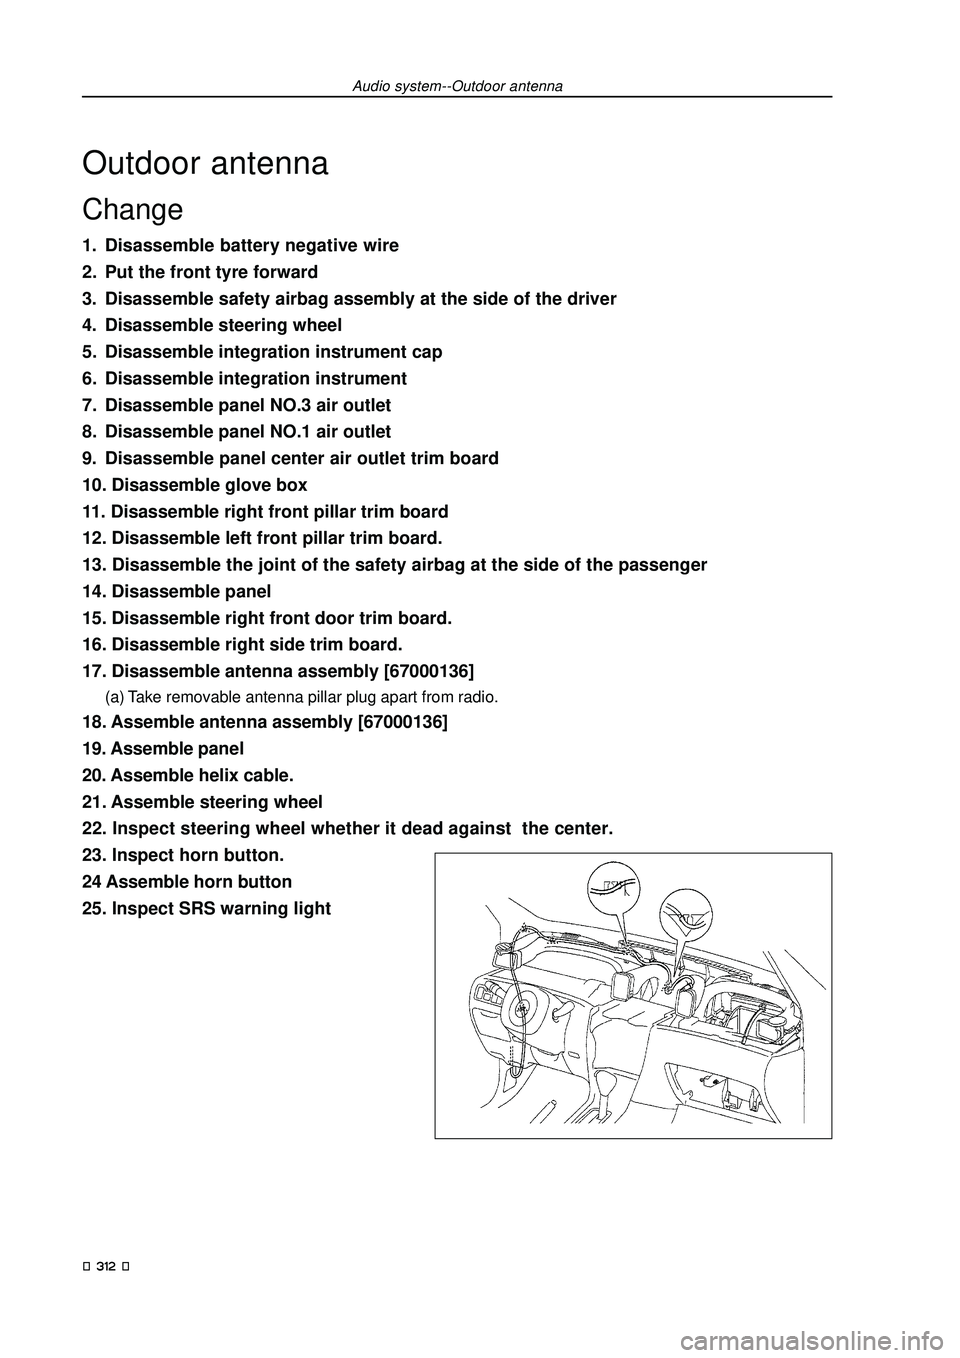 GEELY FC 2008  Workshop Manual Audio system--Outdoor antenna
Outdoor antenna
Change
1. Disassemble battery negative wire
2. Put the front tyre forward
3. Disassemble safety airbag assembly at the side of the driver
4. Disassemble s